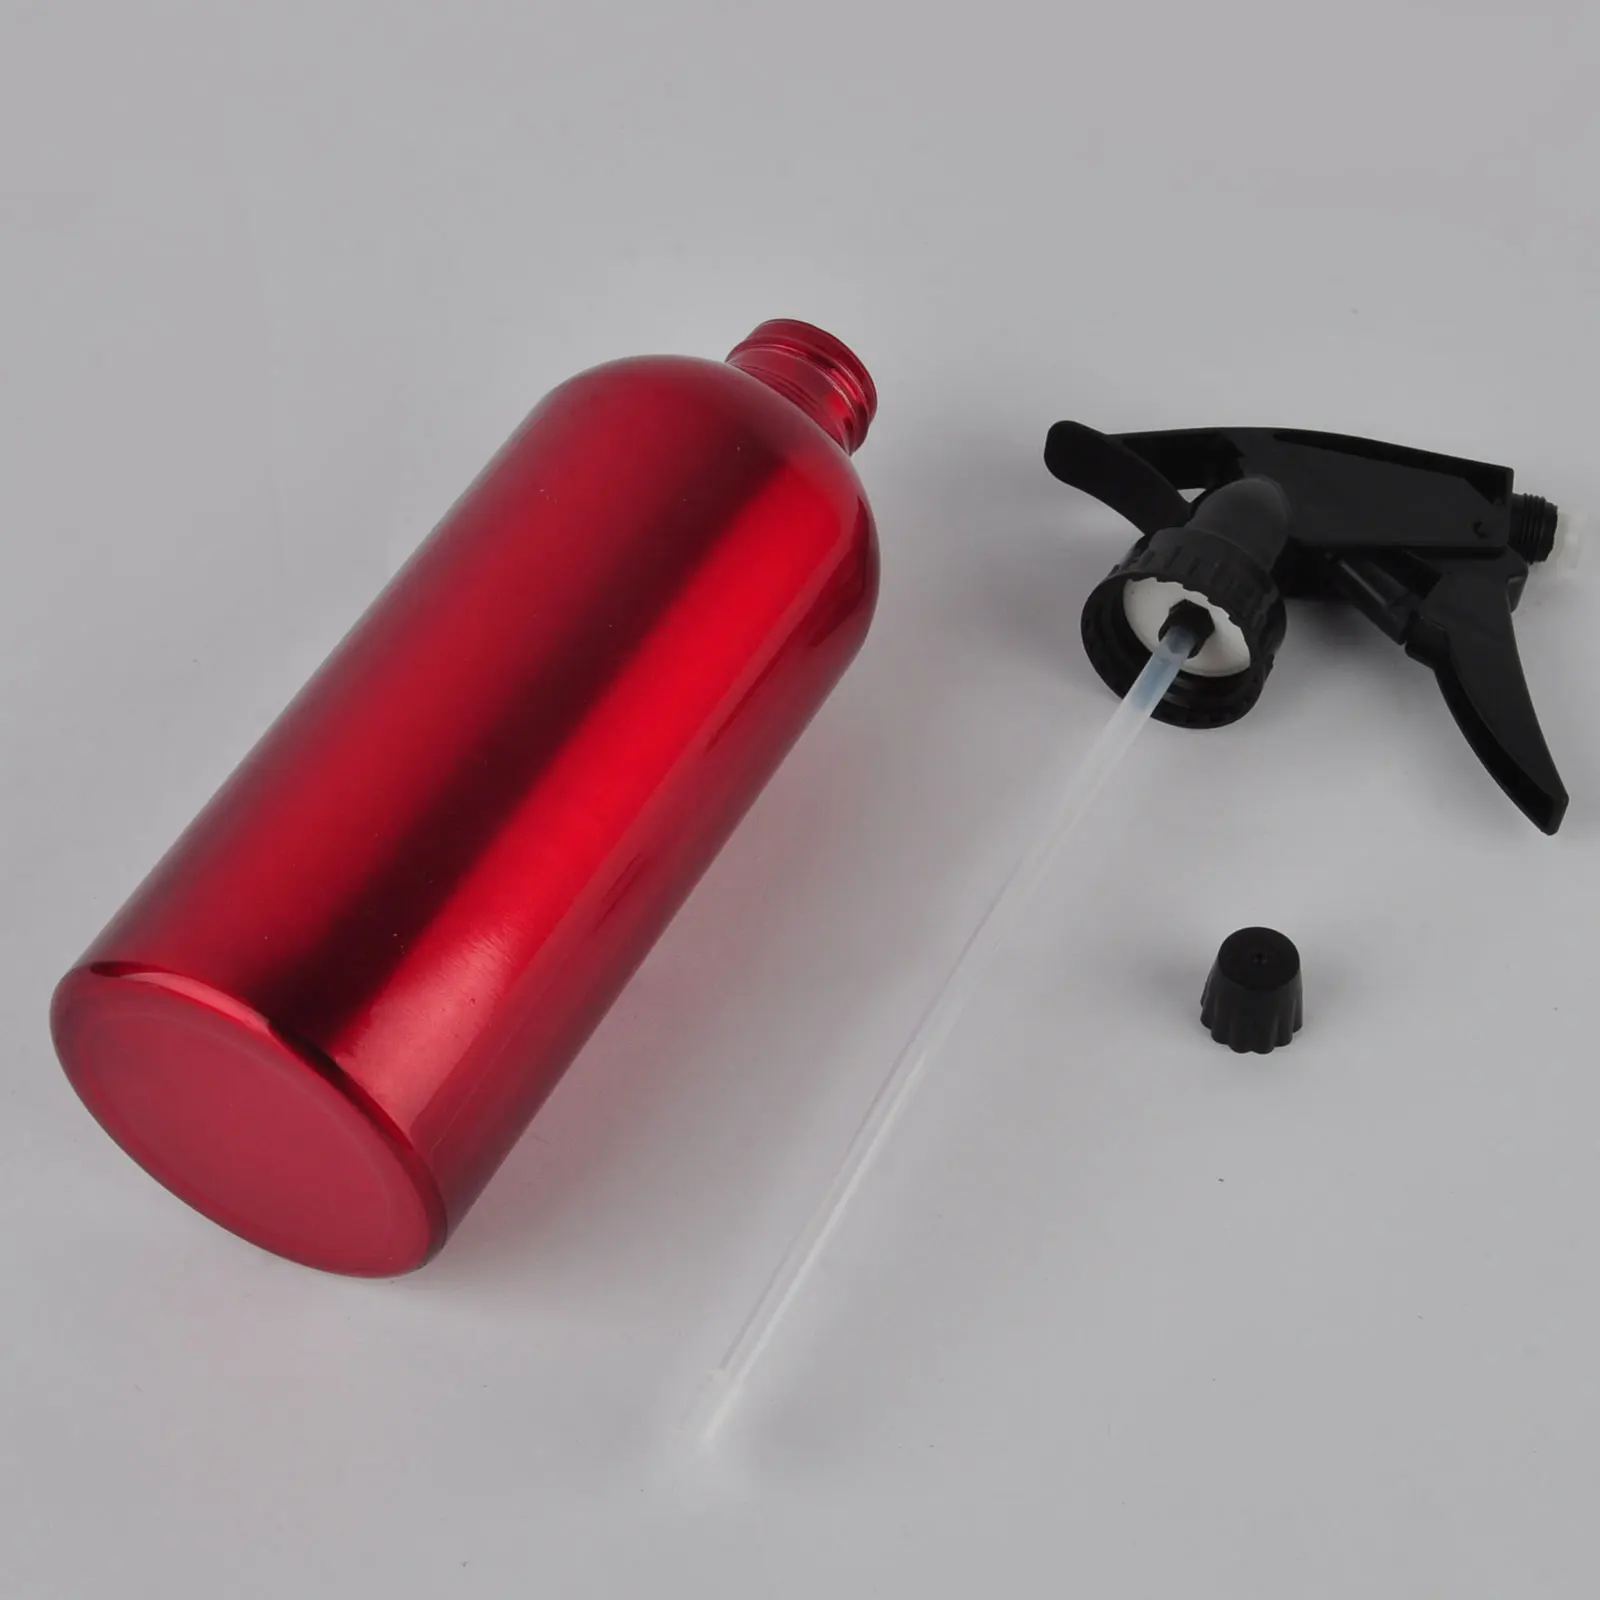 500ml Red Garden Spray Water Bottles Aluminum Spray Bottle Trigger Hairdressing Tool For Hair Salons Hairstyling Tools